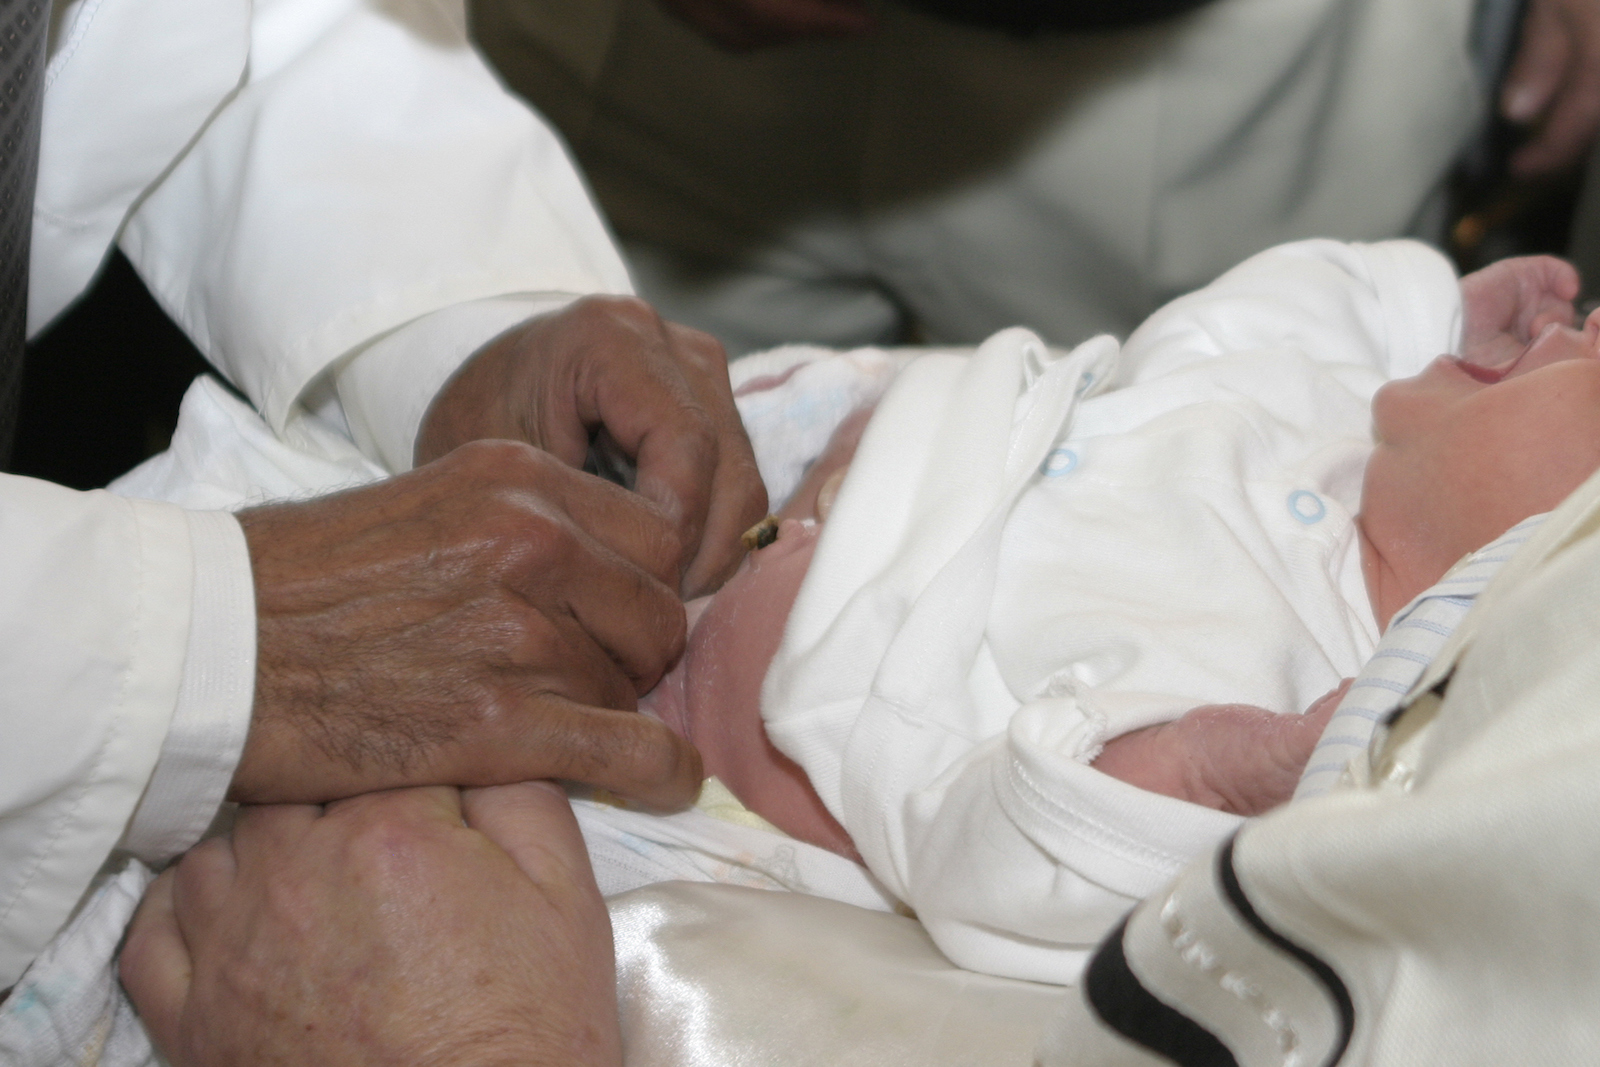 Norwegian Hospitals Refuse To Assist In Circumcisions The Times Of Israel